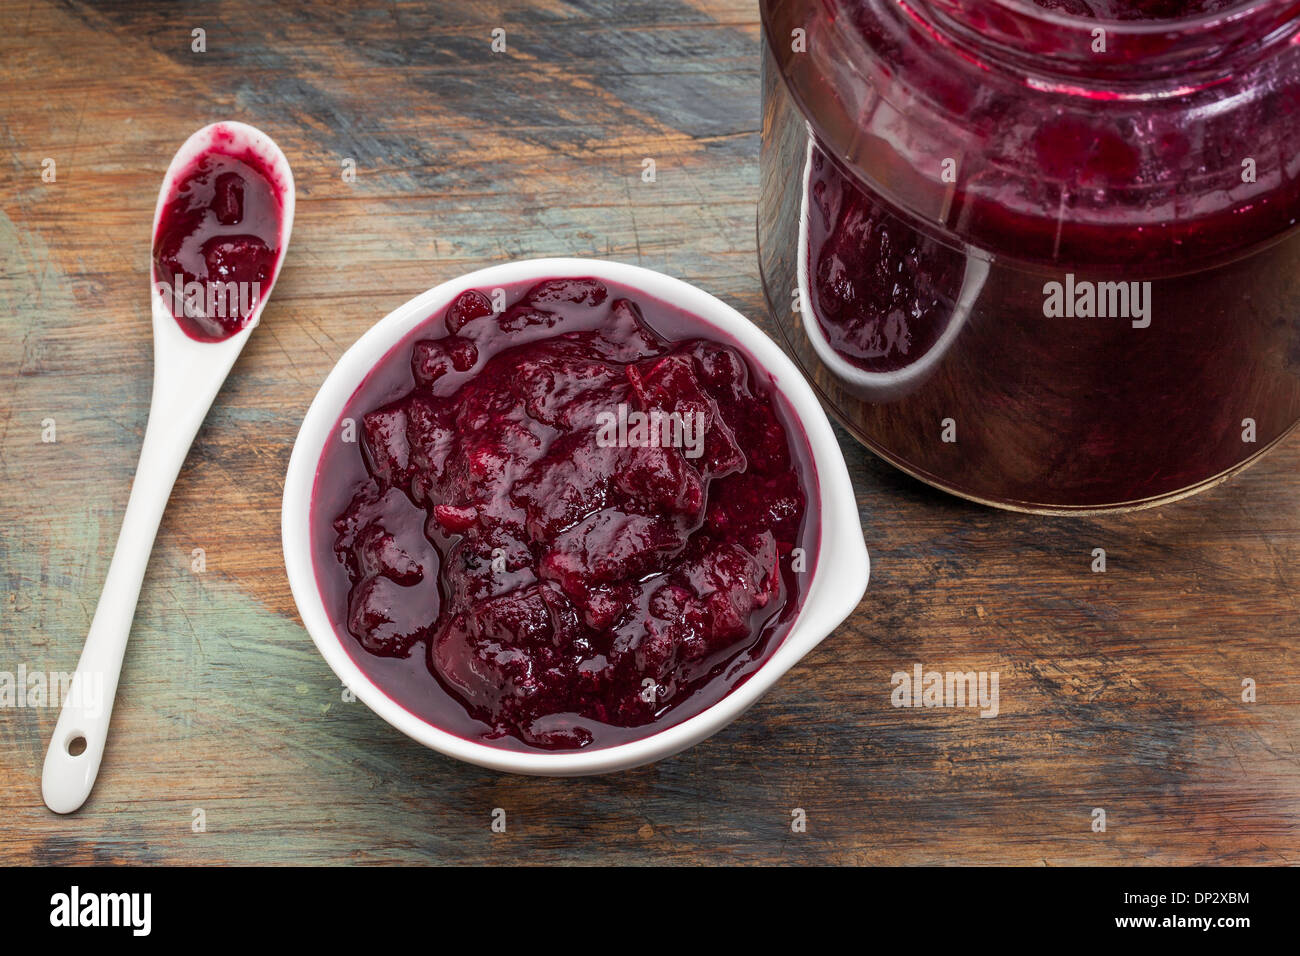 sugar free cranberry sauce with addition of blueberry, apples and honey - small bowl, jar and spoon Stock Photo